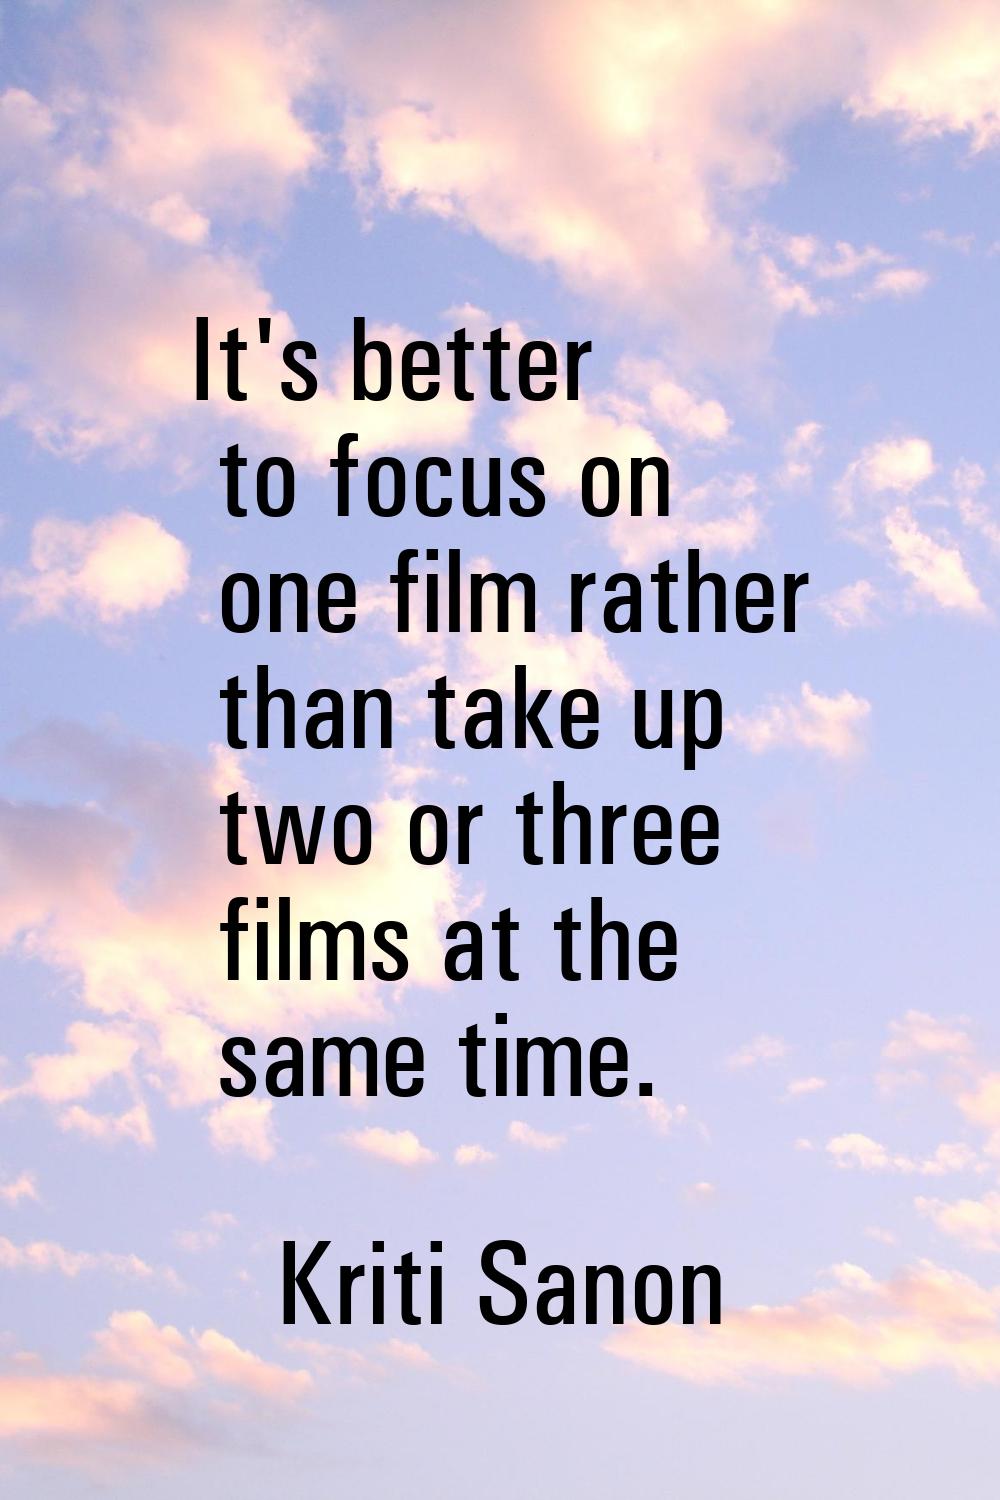 It's better to focus on one film rather than take up two or three films at the same time.